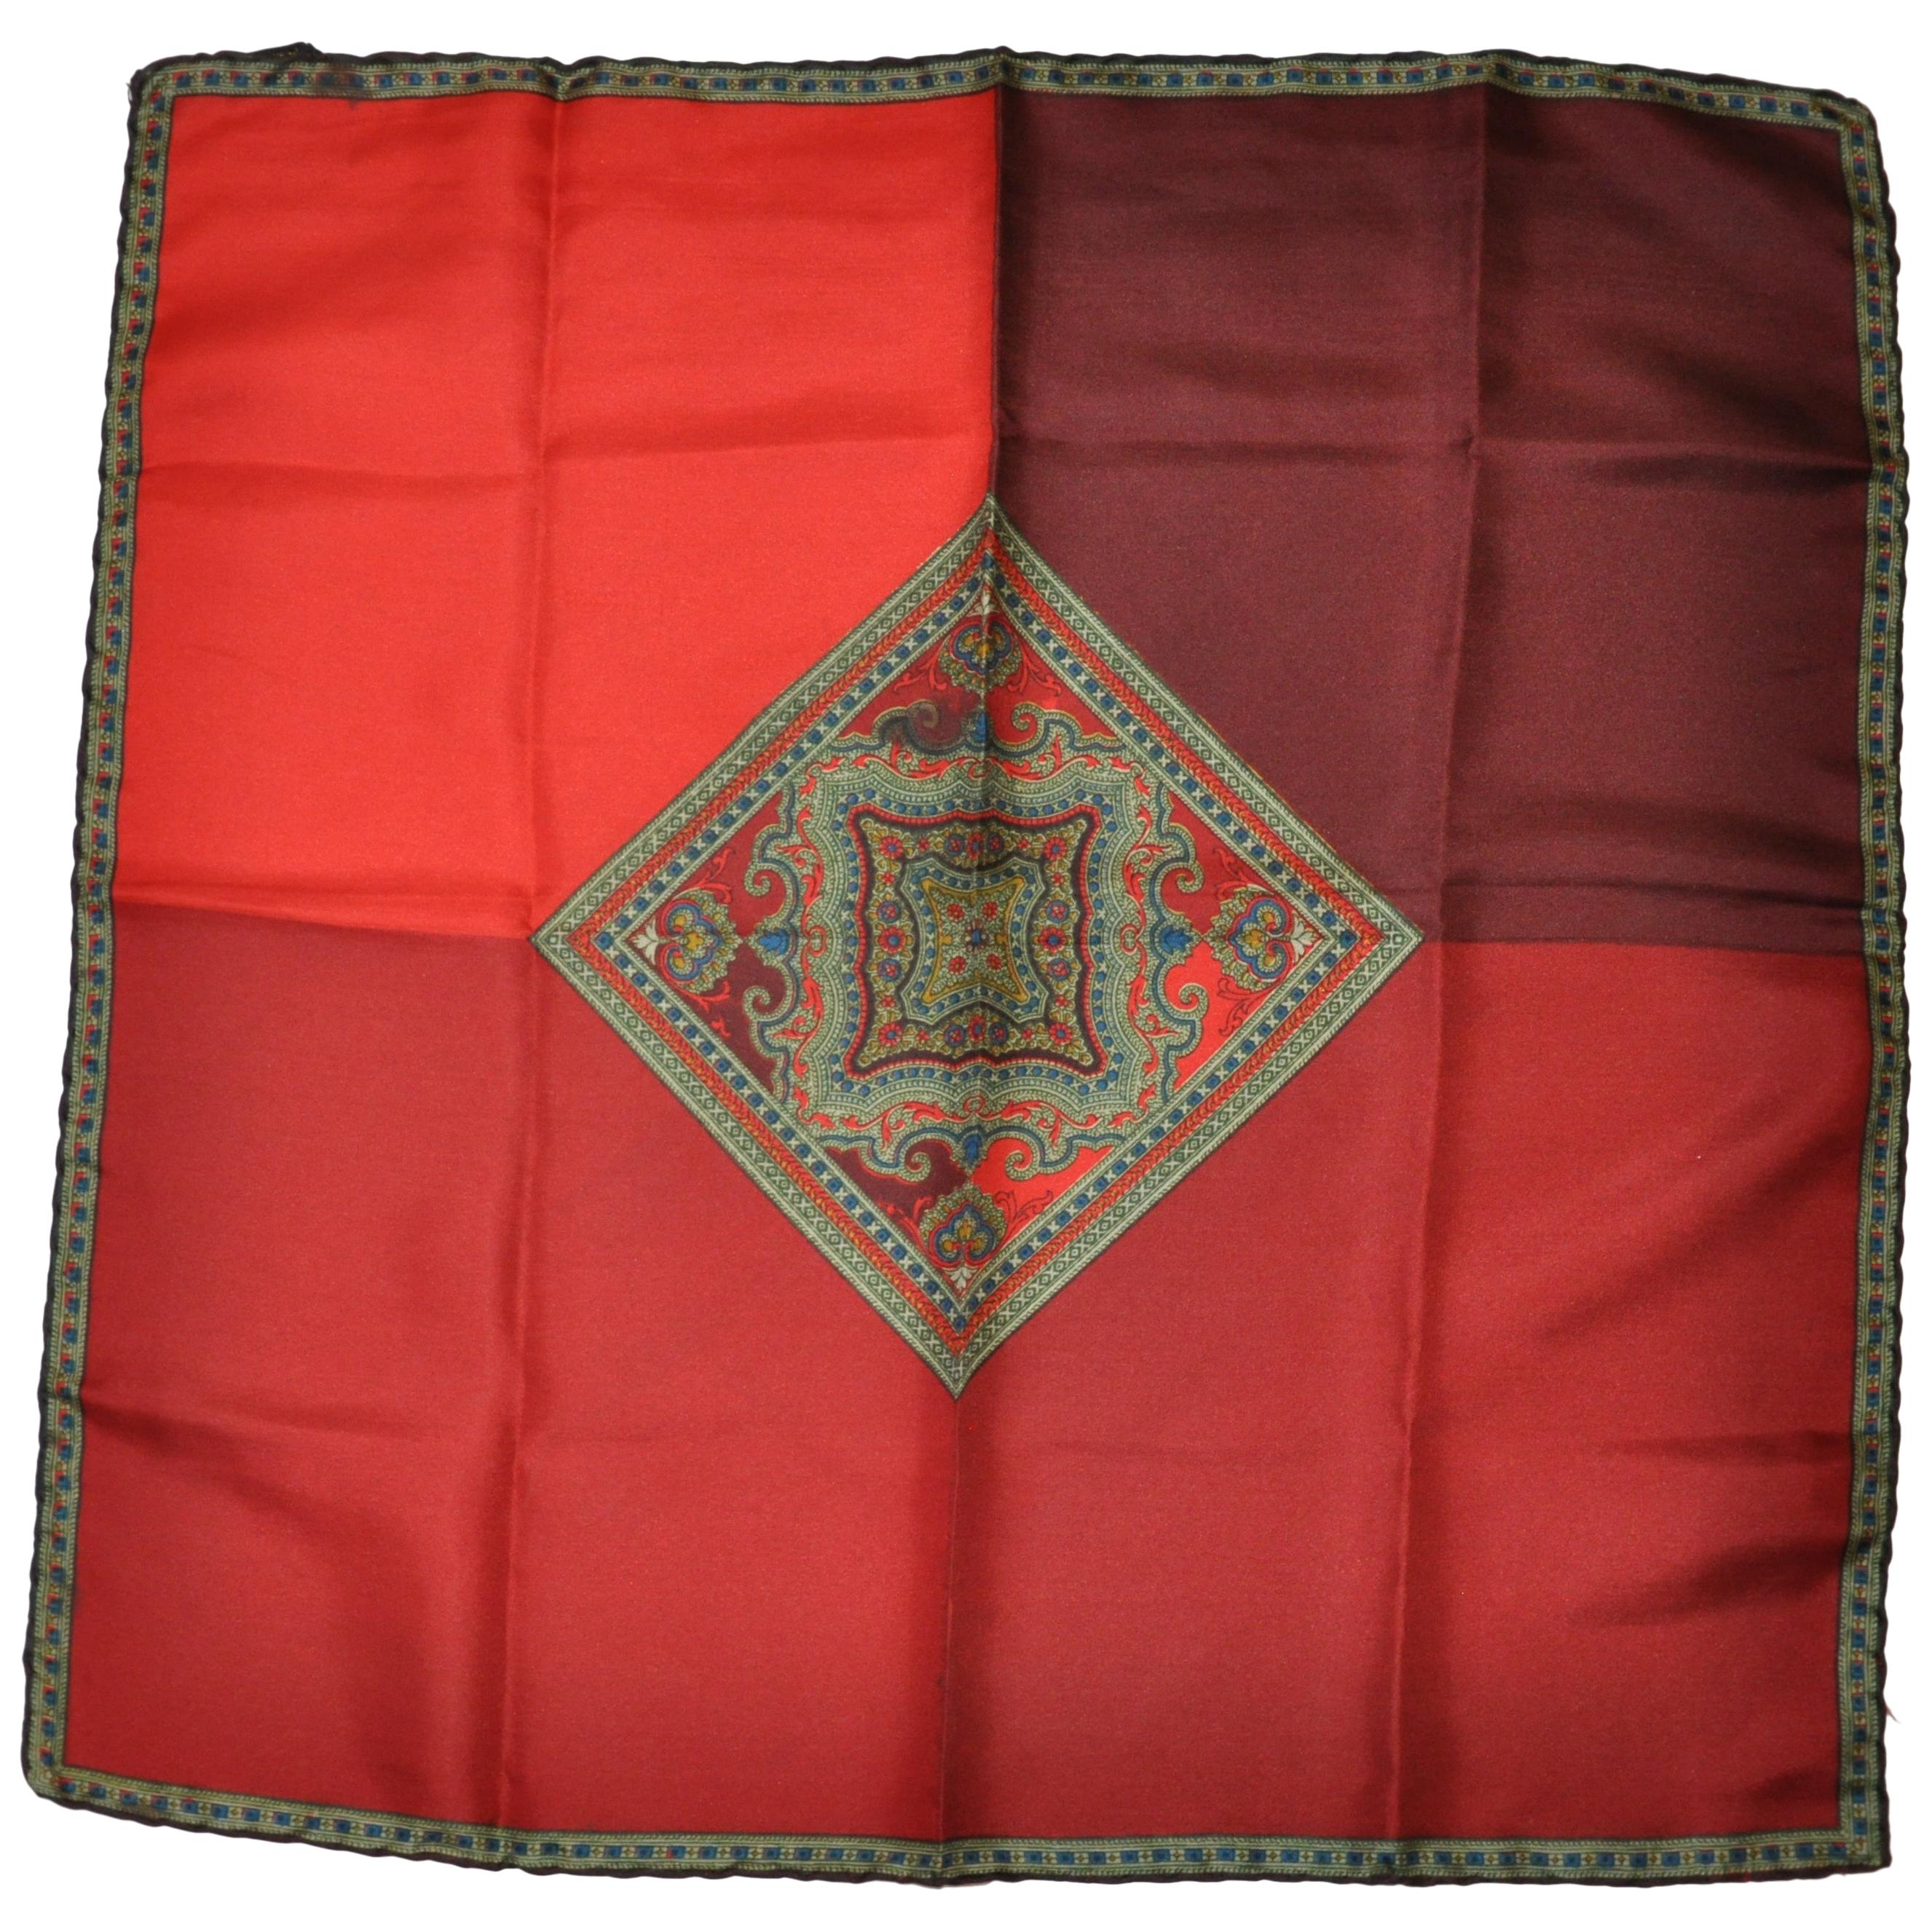 Ashear Elegant Warm Hues of Red with "Imperial" Center Silk Handkerchief